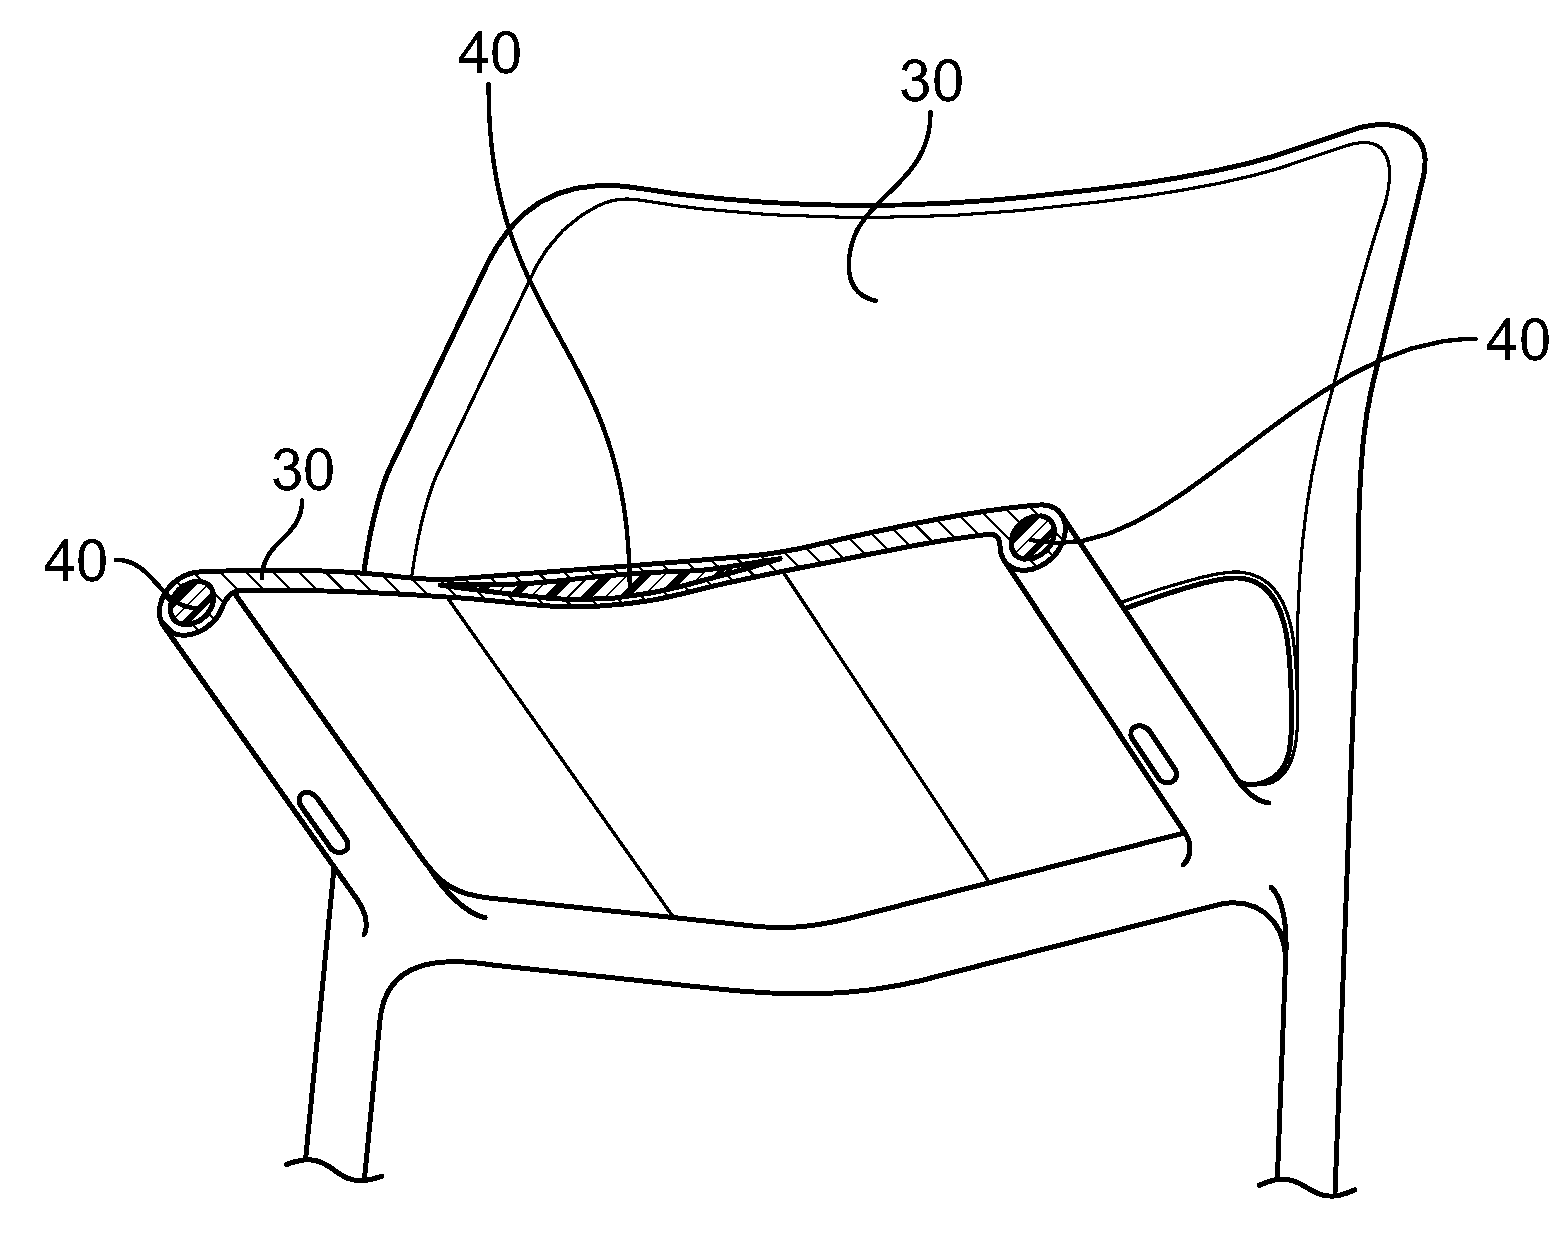 Co-injection molded chair